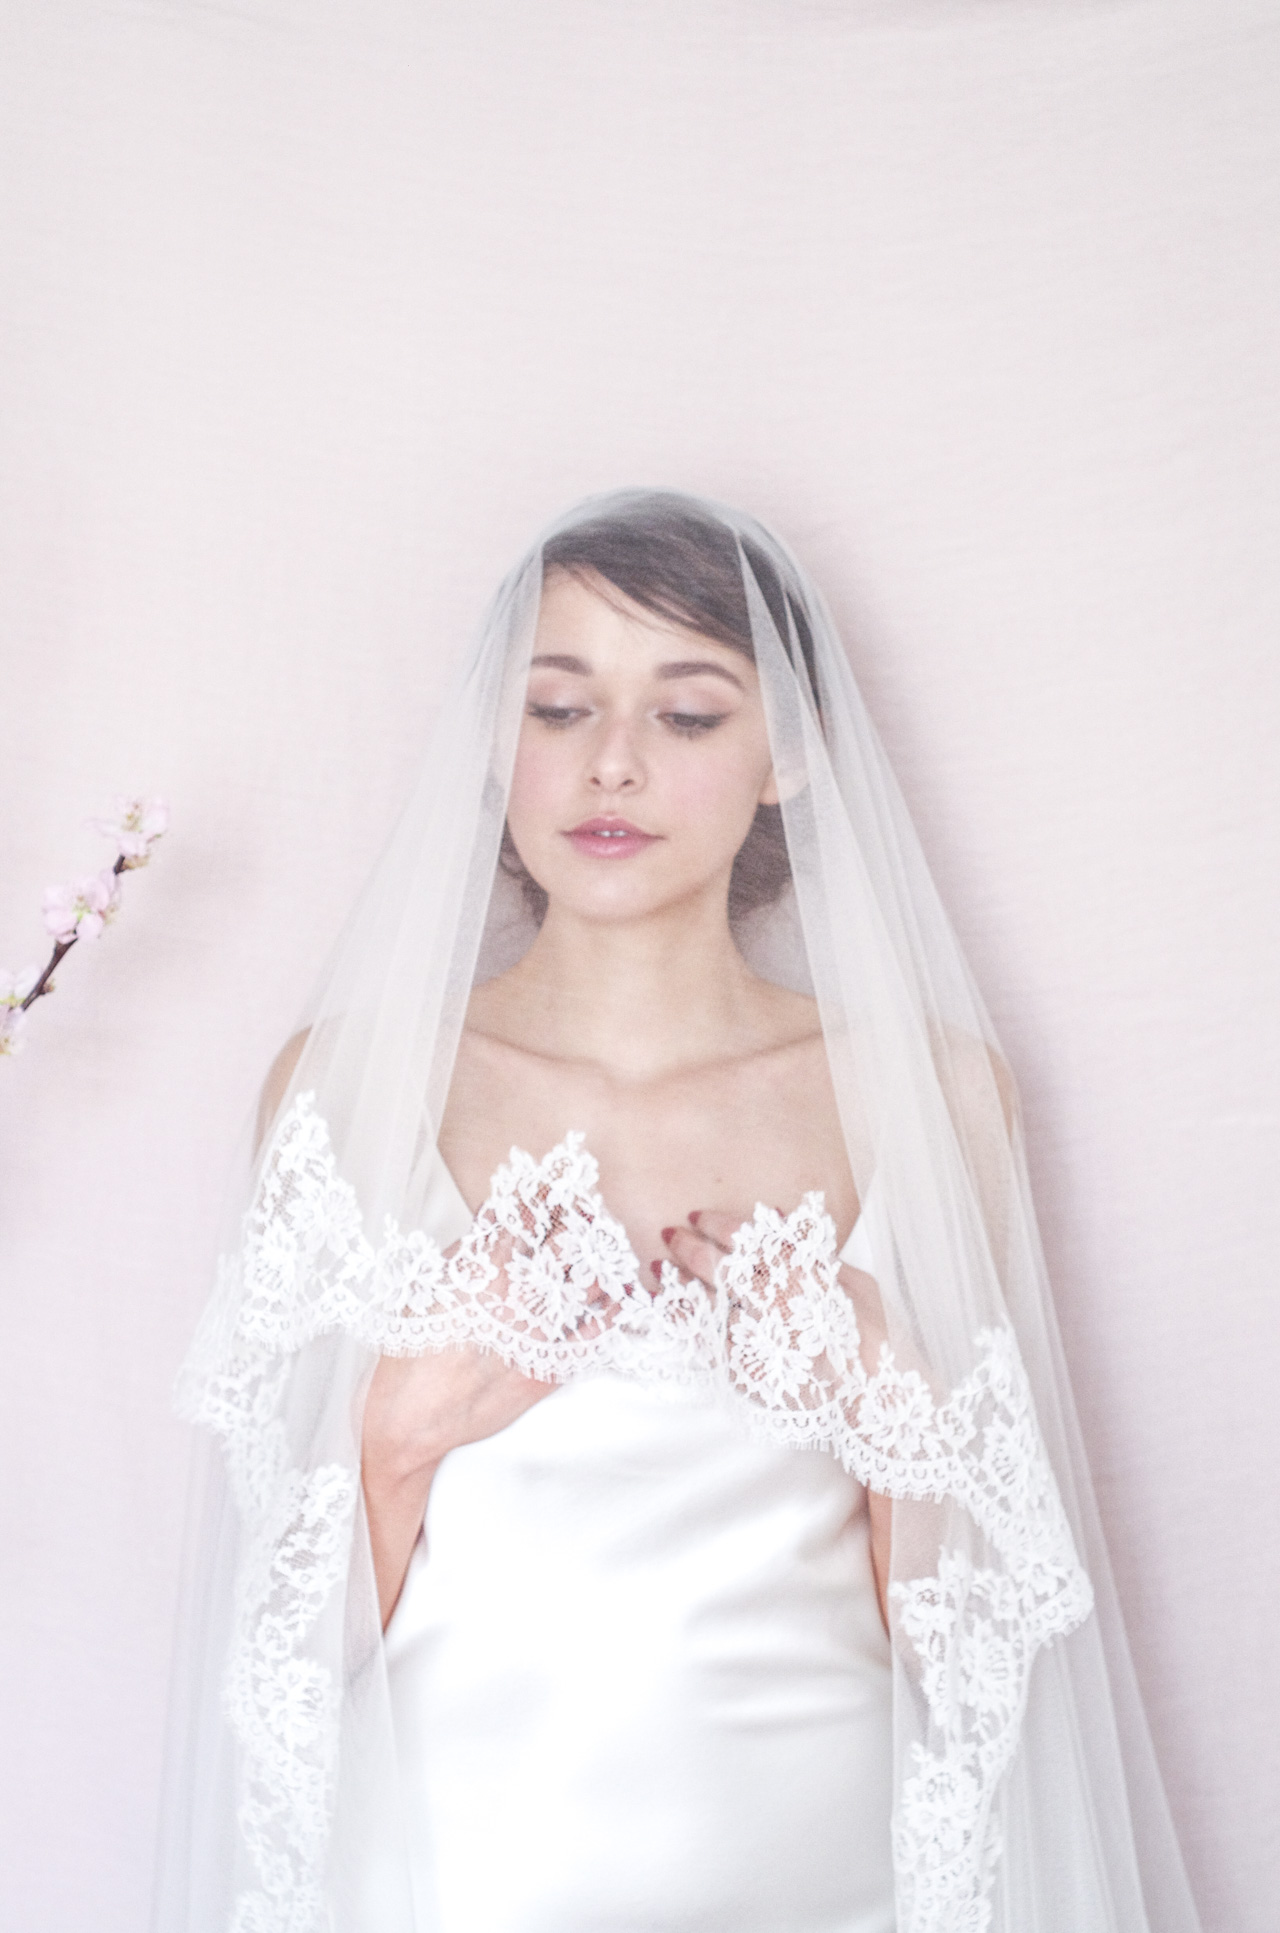 Shooting mariage blogueuse mode - french fashion blog weeding photography - Maquillage mariage nude rosé - Nude make up - flowers crown 